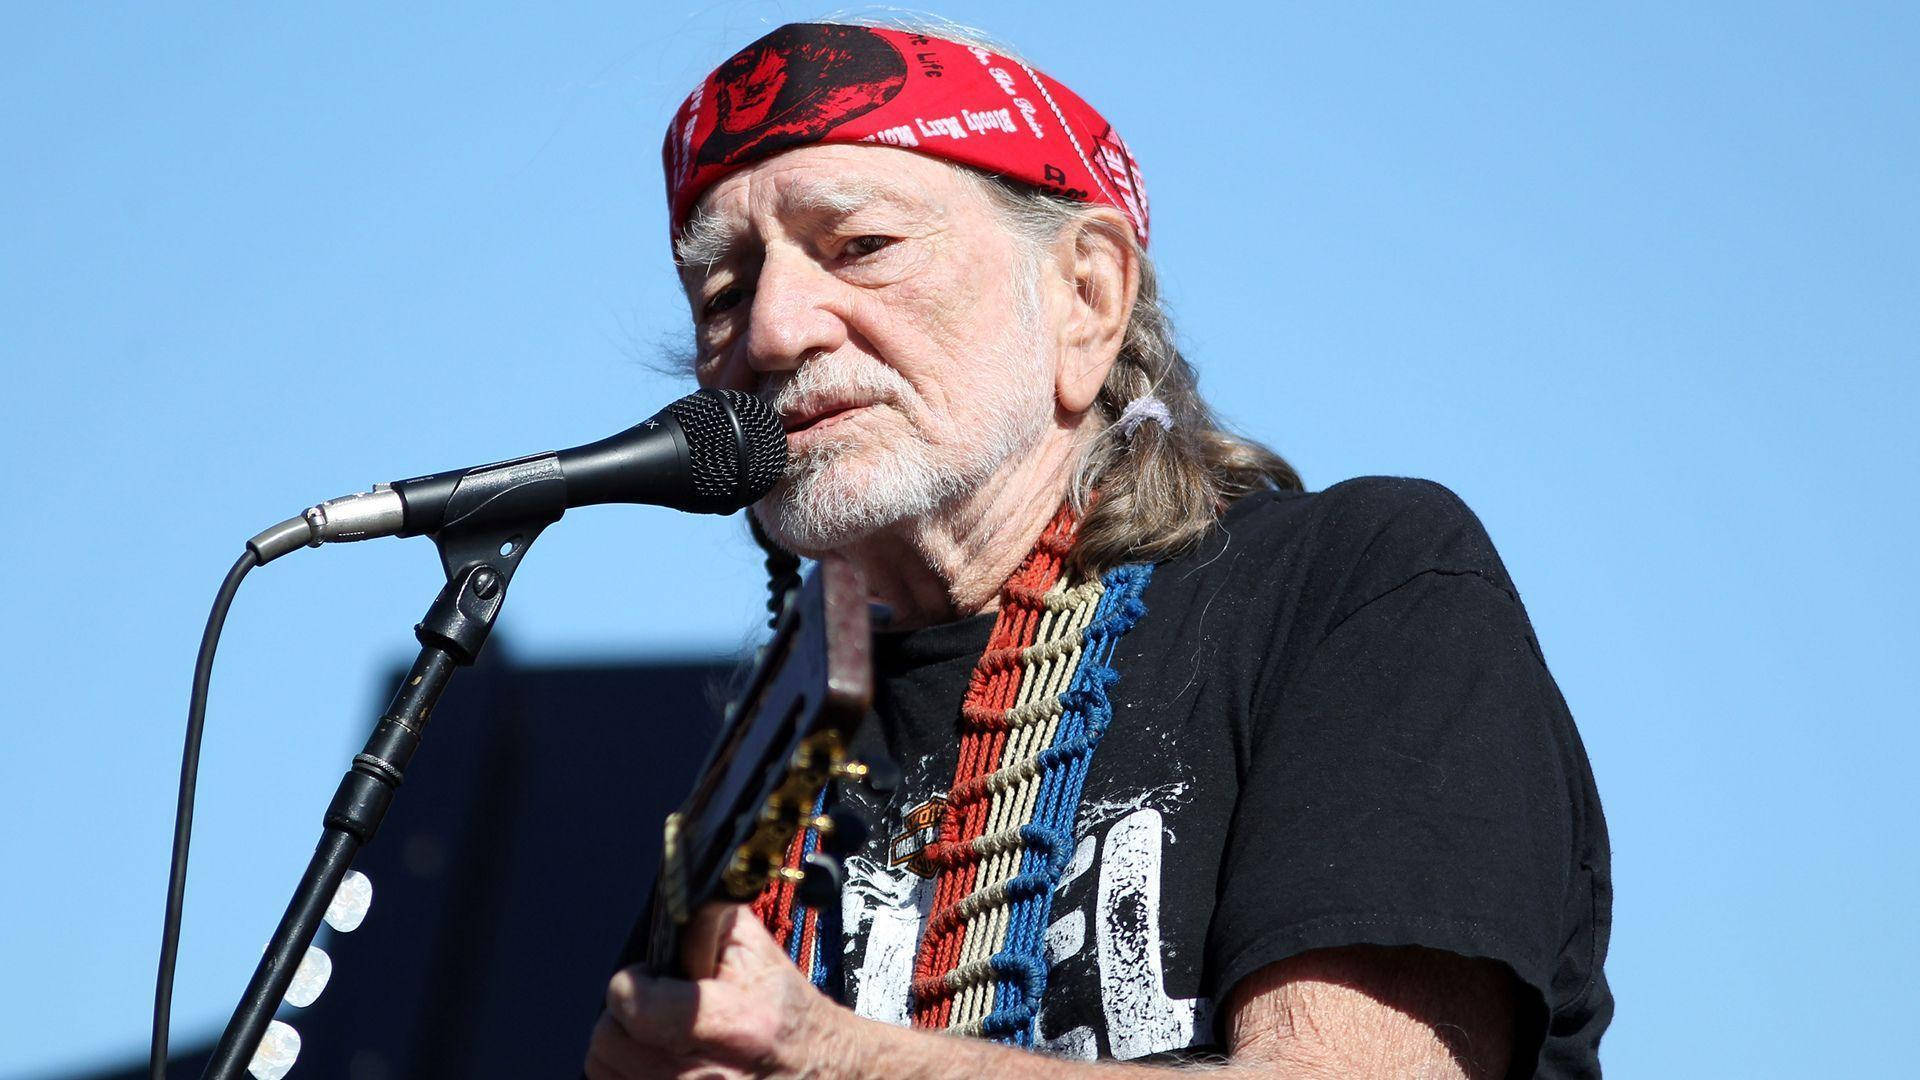 Willie Nelson Singing While Playing Guitar Wallpaper